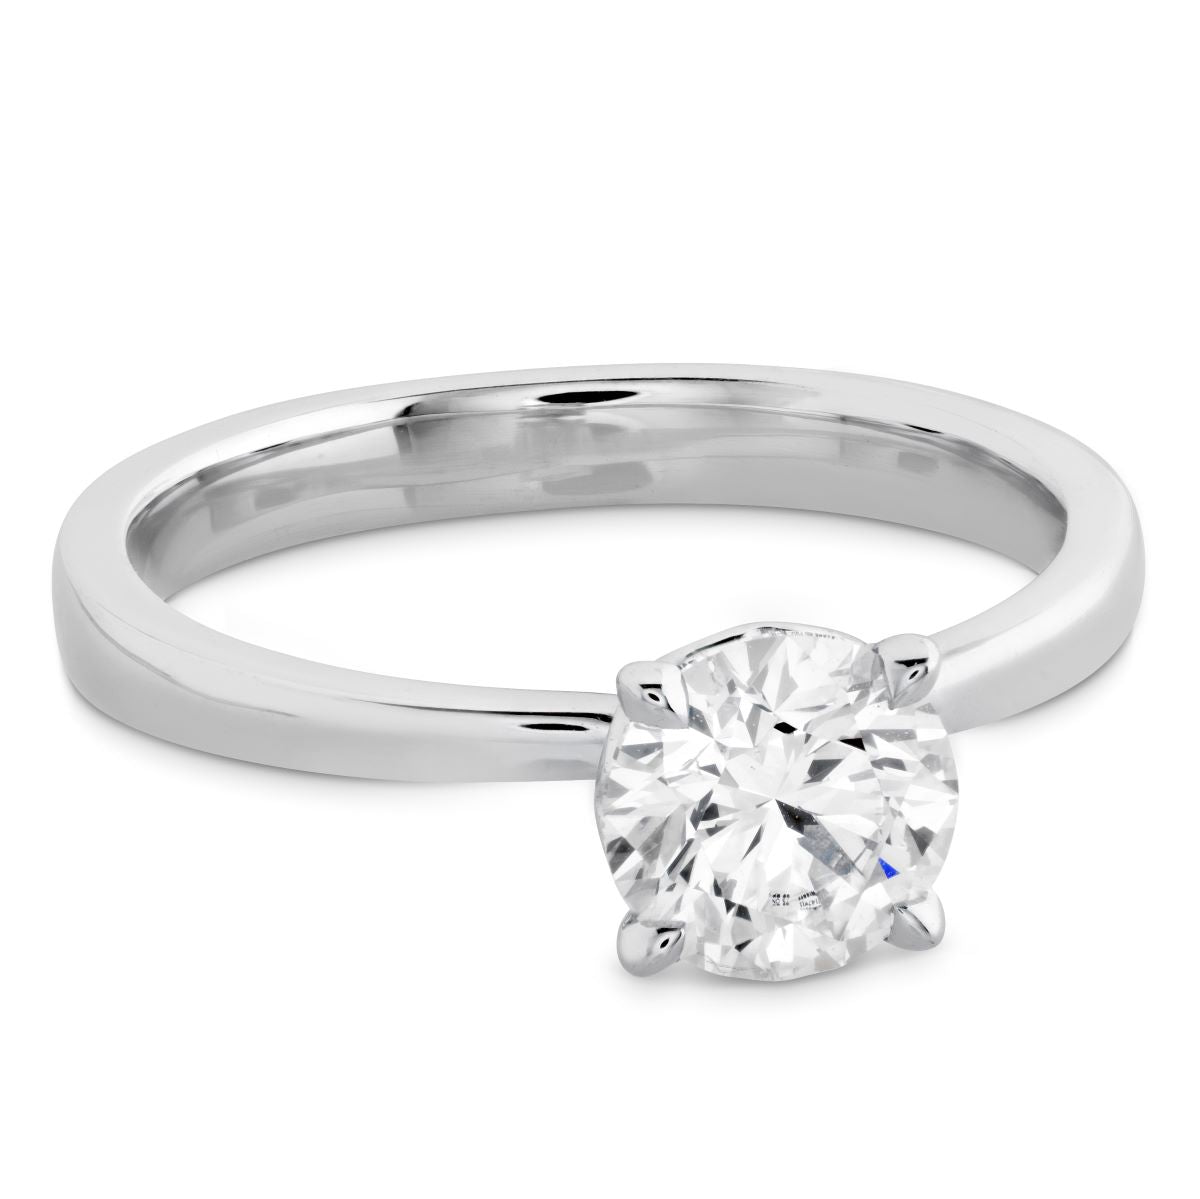 4 Claw Diamond engagement ring